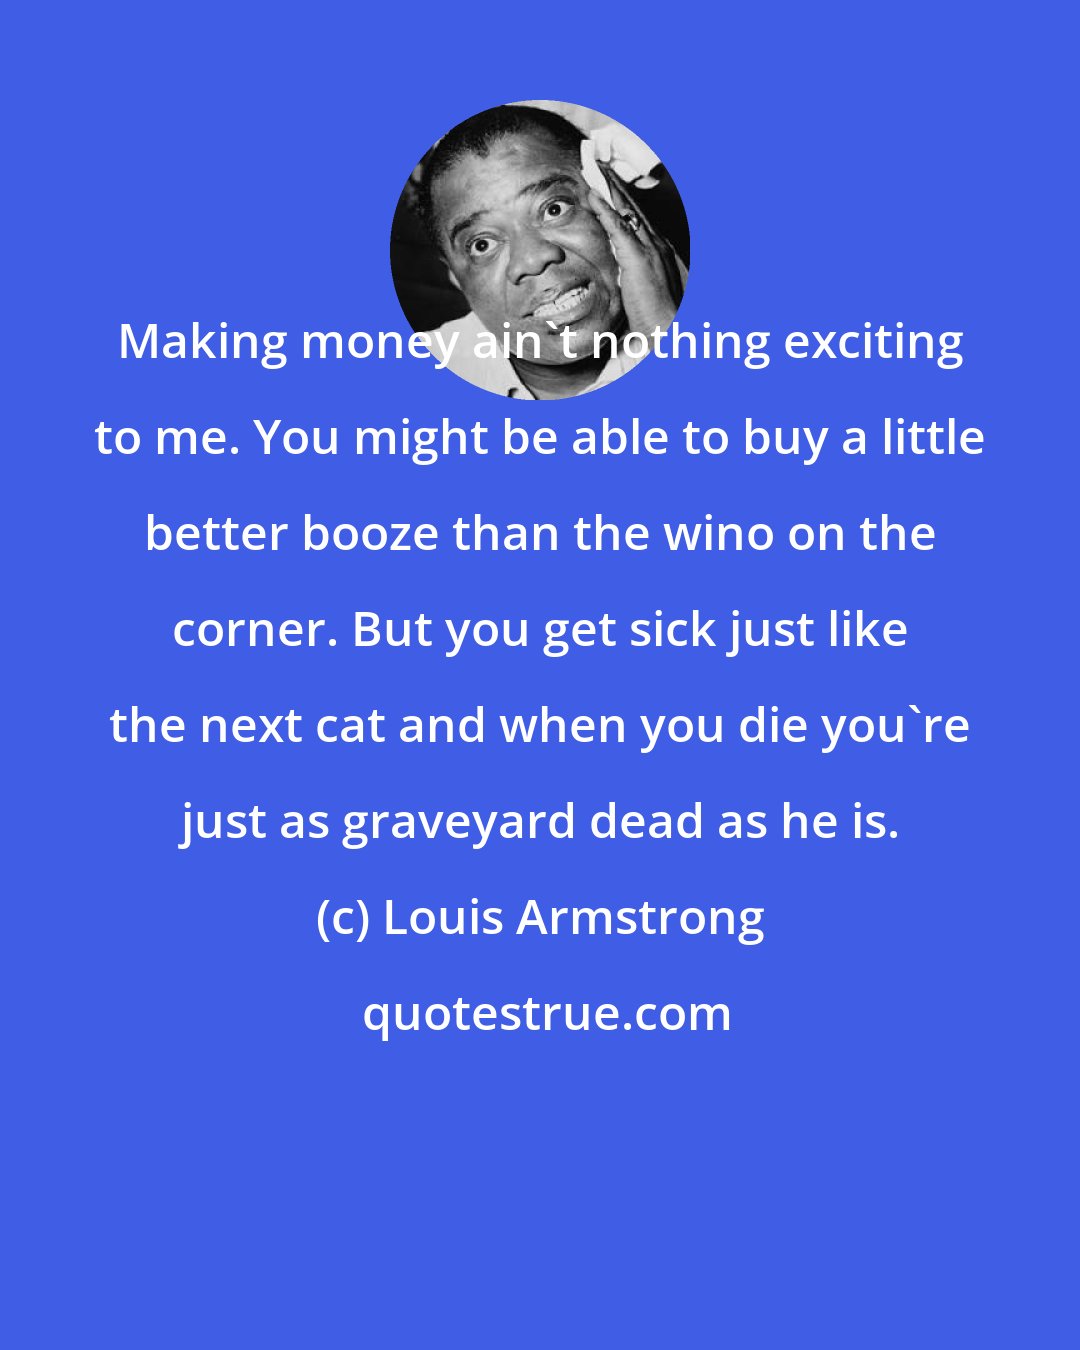 Louis Armstrong: Making money ain't nothing exciting to me. You might be able to buy a little better booze than the wino on the corner. But you get sick just like the next cat and when you die you're just as graveyard dead as he is.